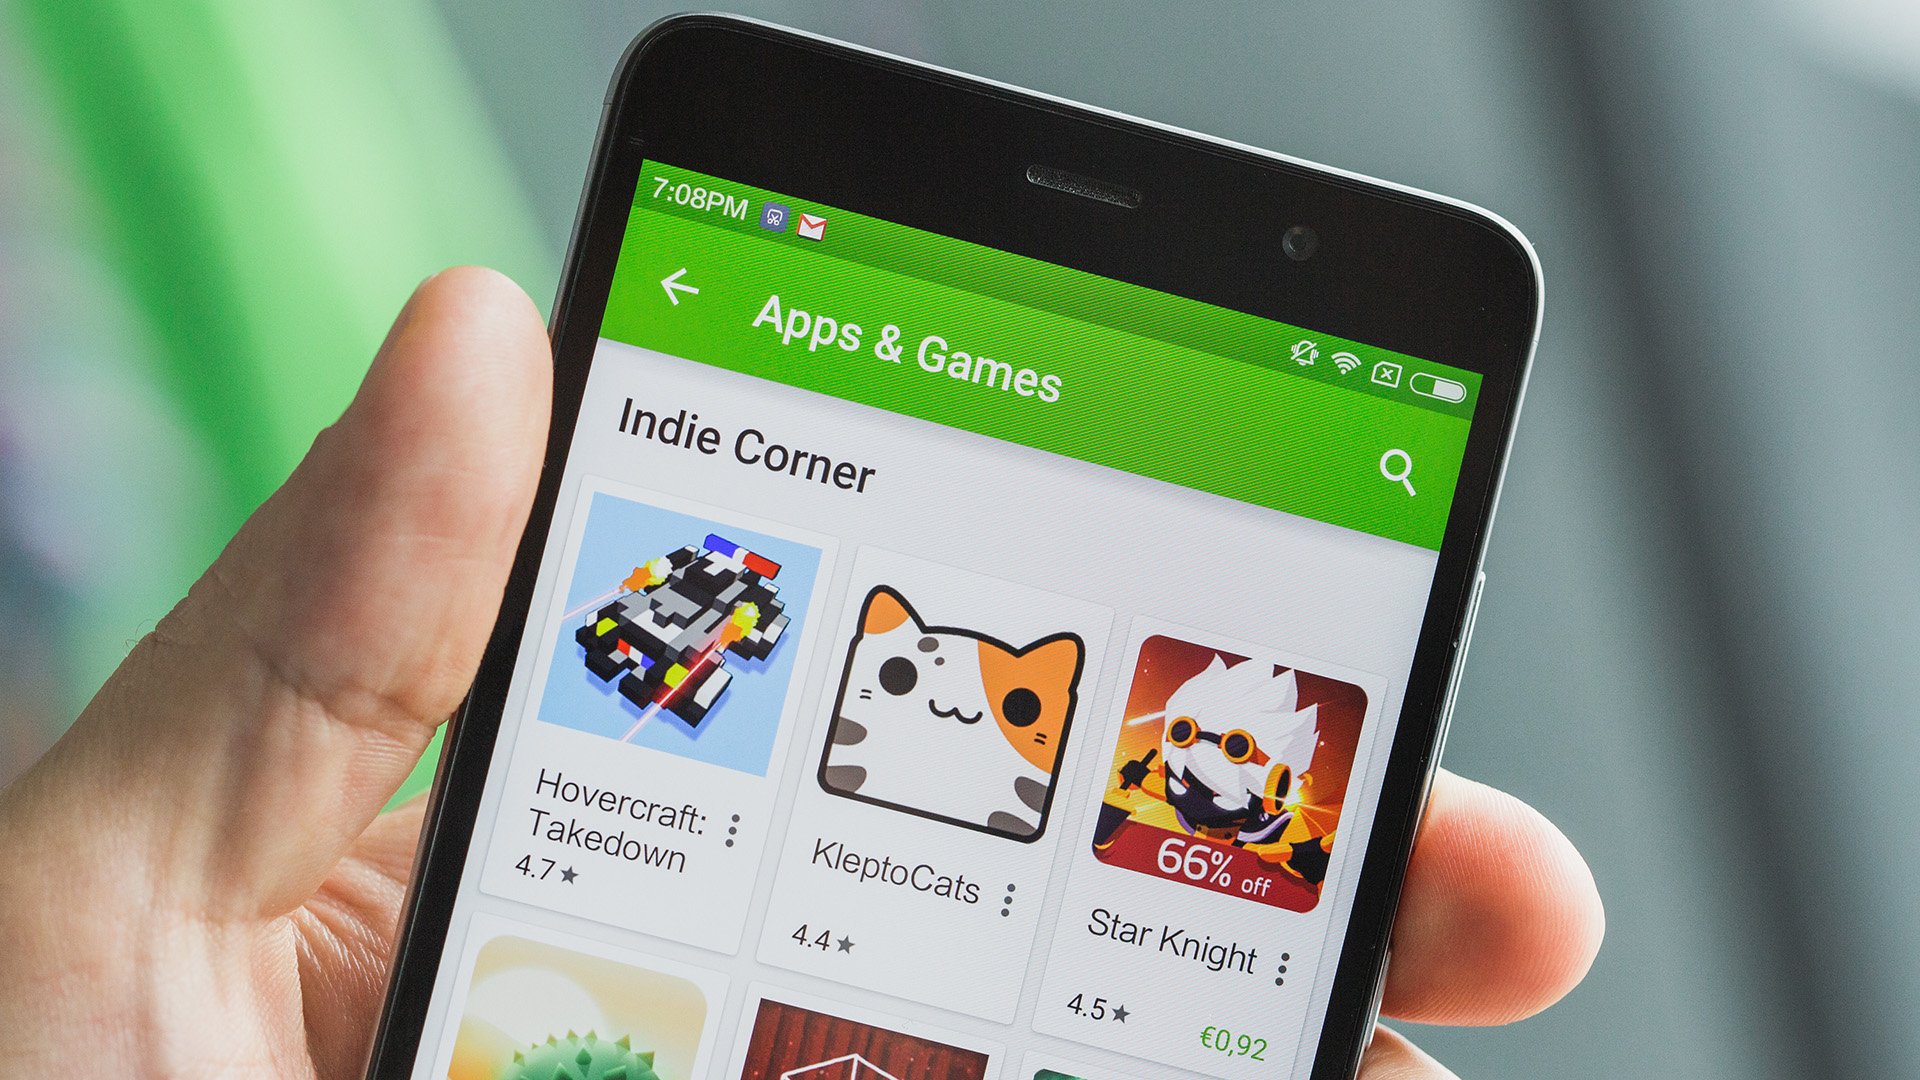 Apps and games. Google Play. Game app. Инди плей. Apps corner